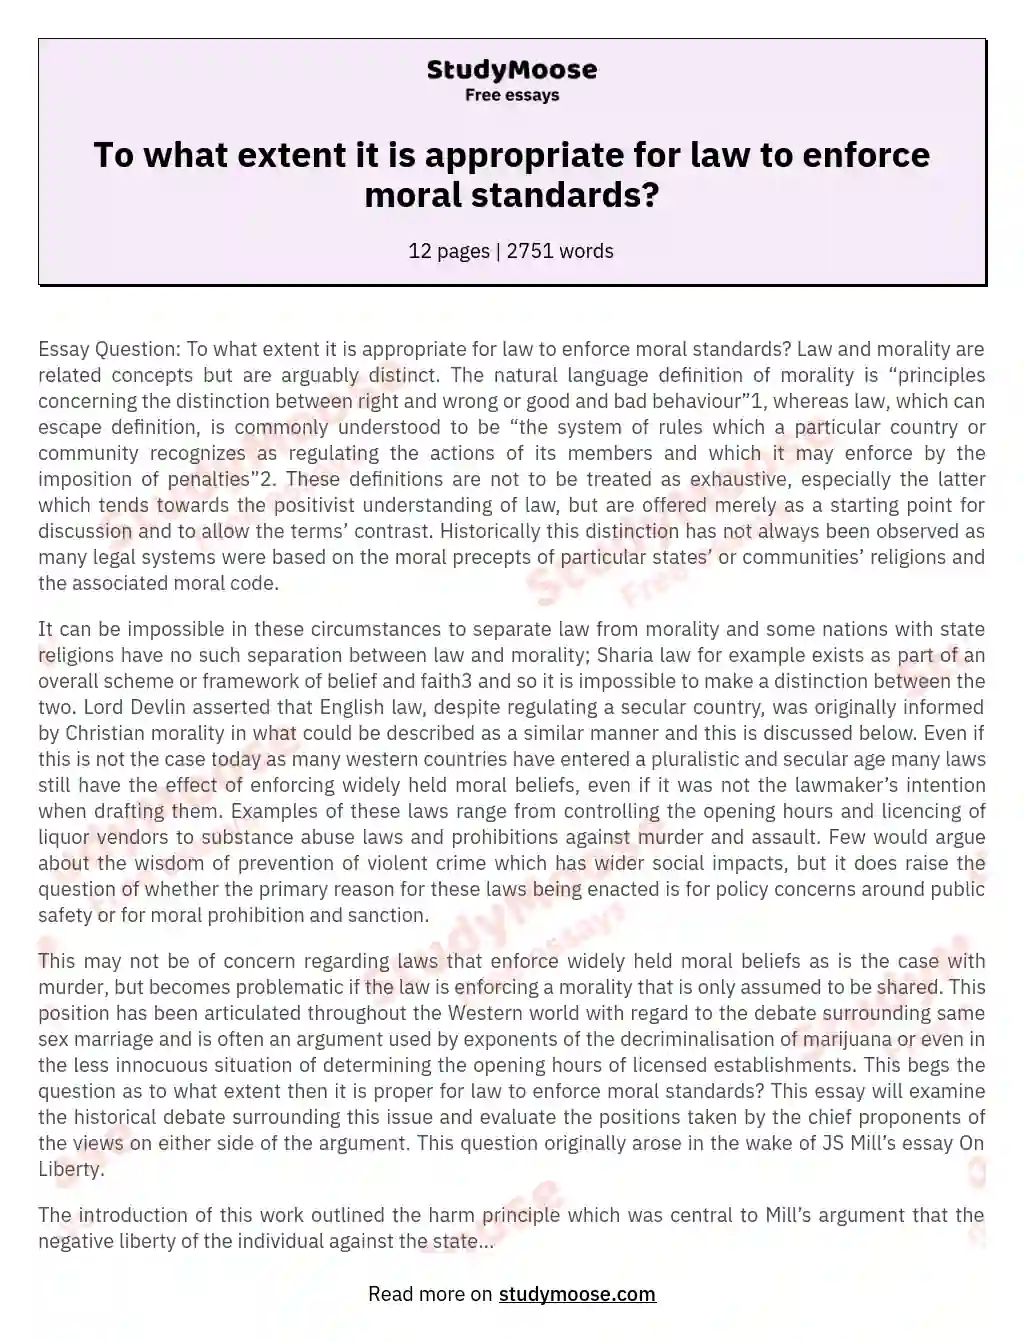 To what extent it is appropriate for law to enforce moral standards? essay